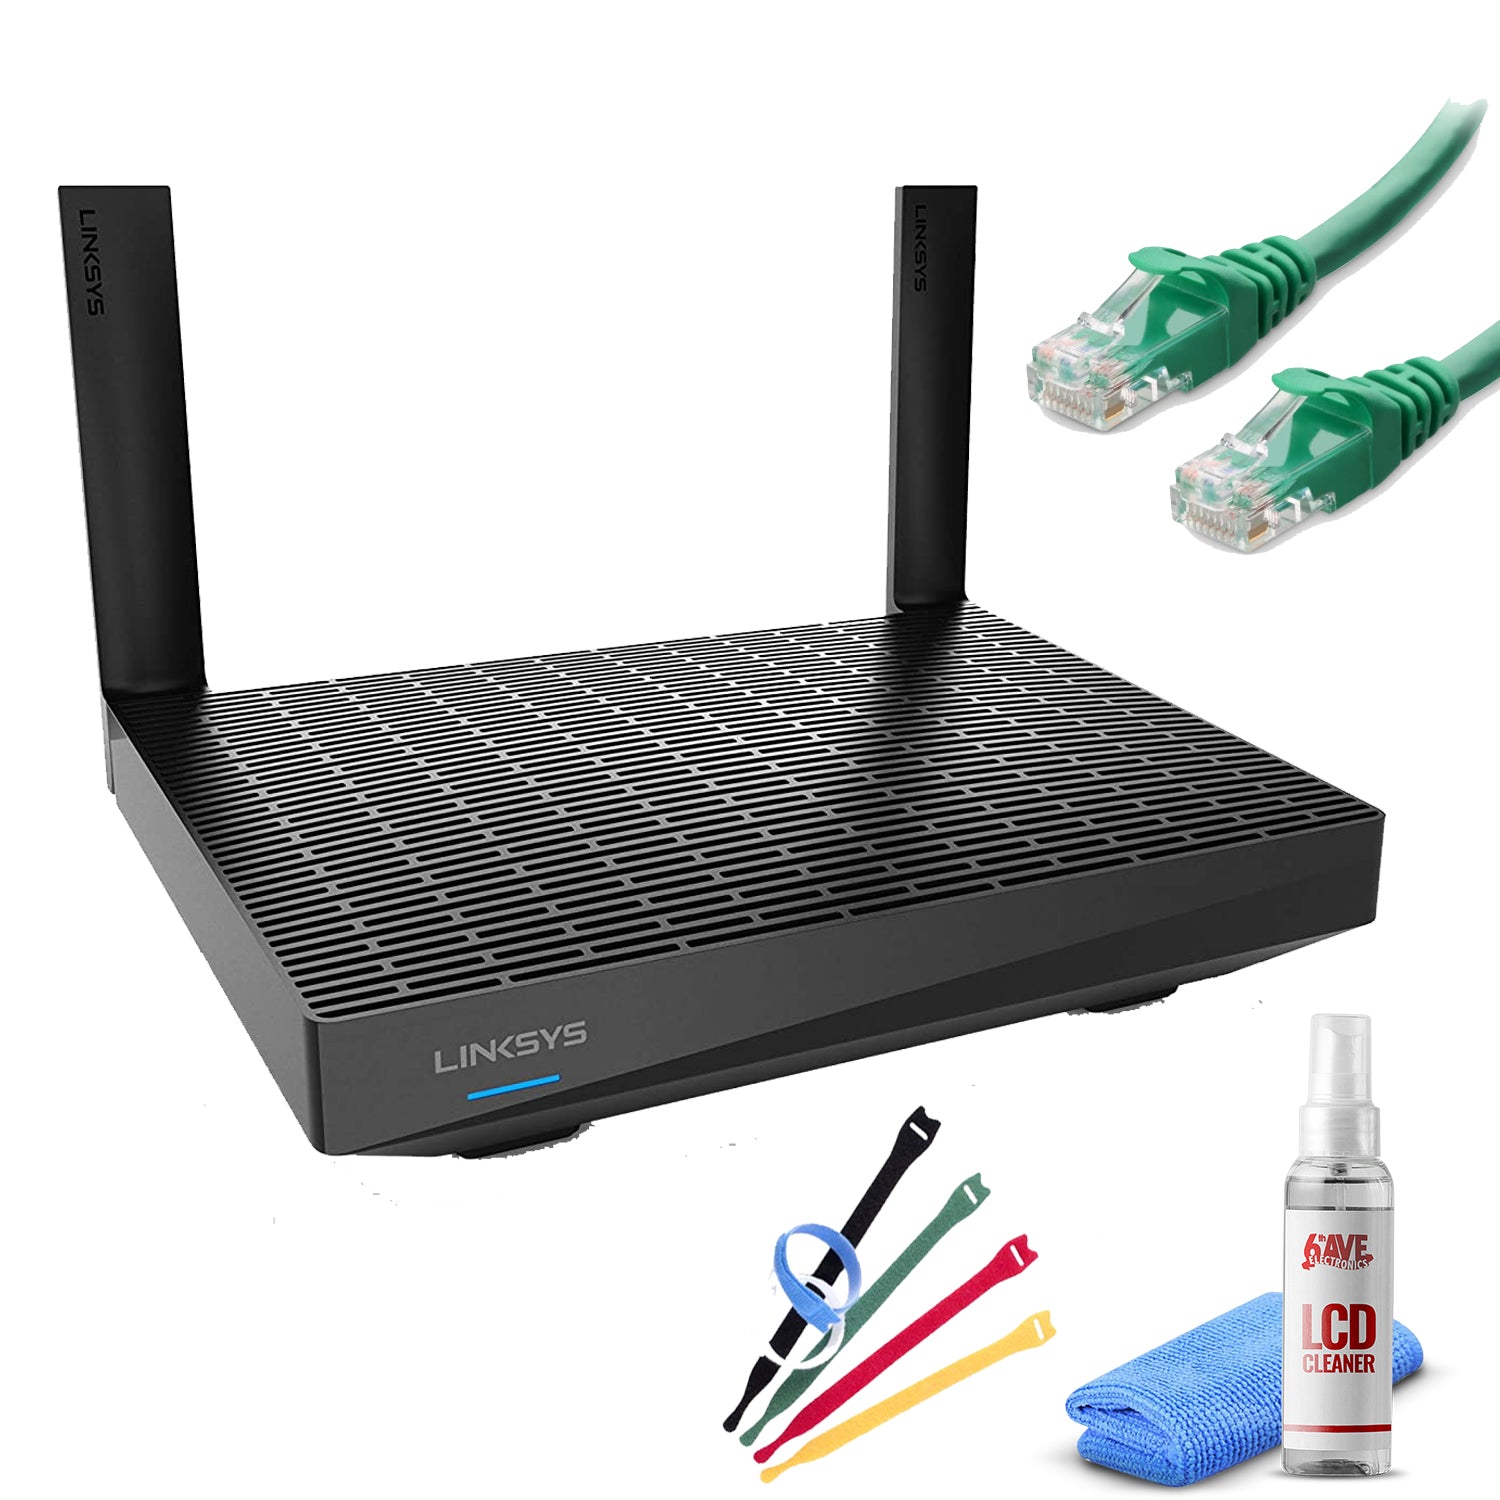 Linksys MR7350 MAX-STREAM AX1800 Wireless Router with Ethernet Cable + Wire Ties